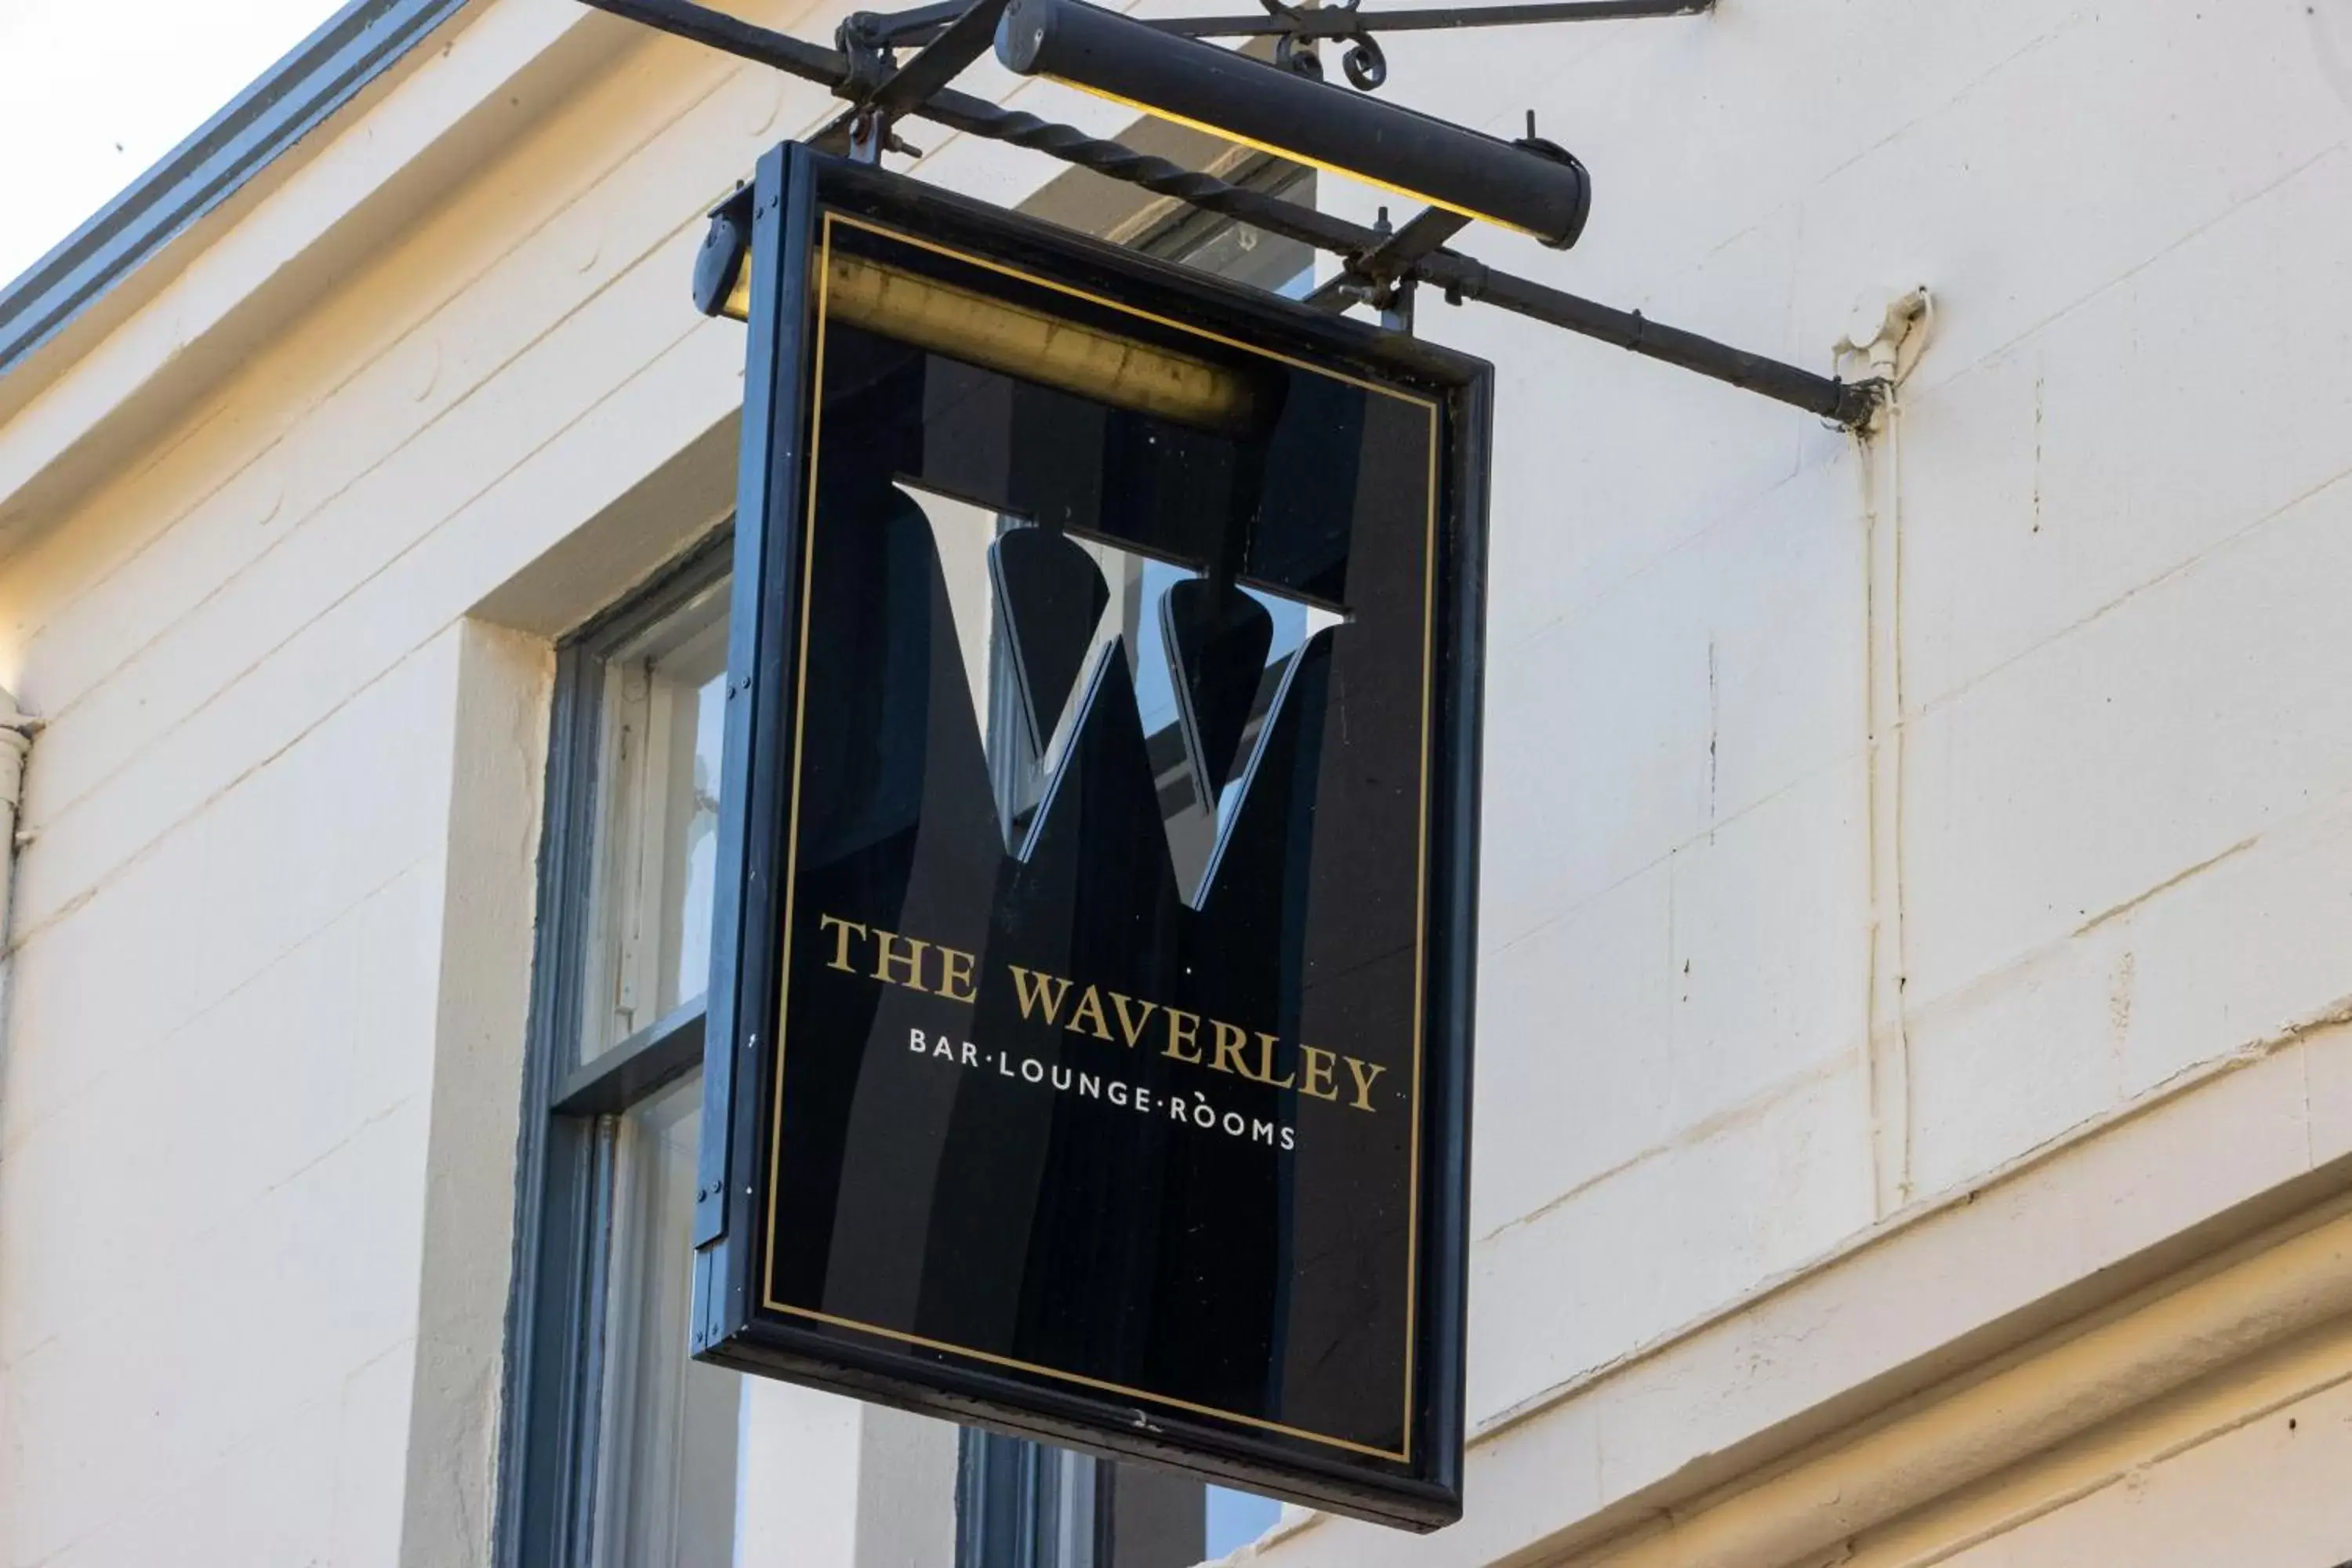 Property building in The Waverley Hotel